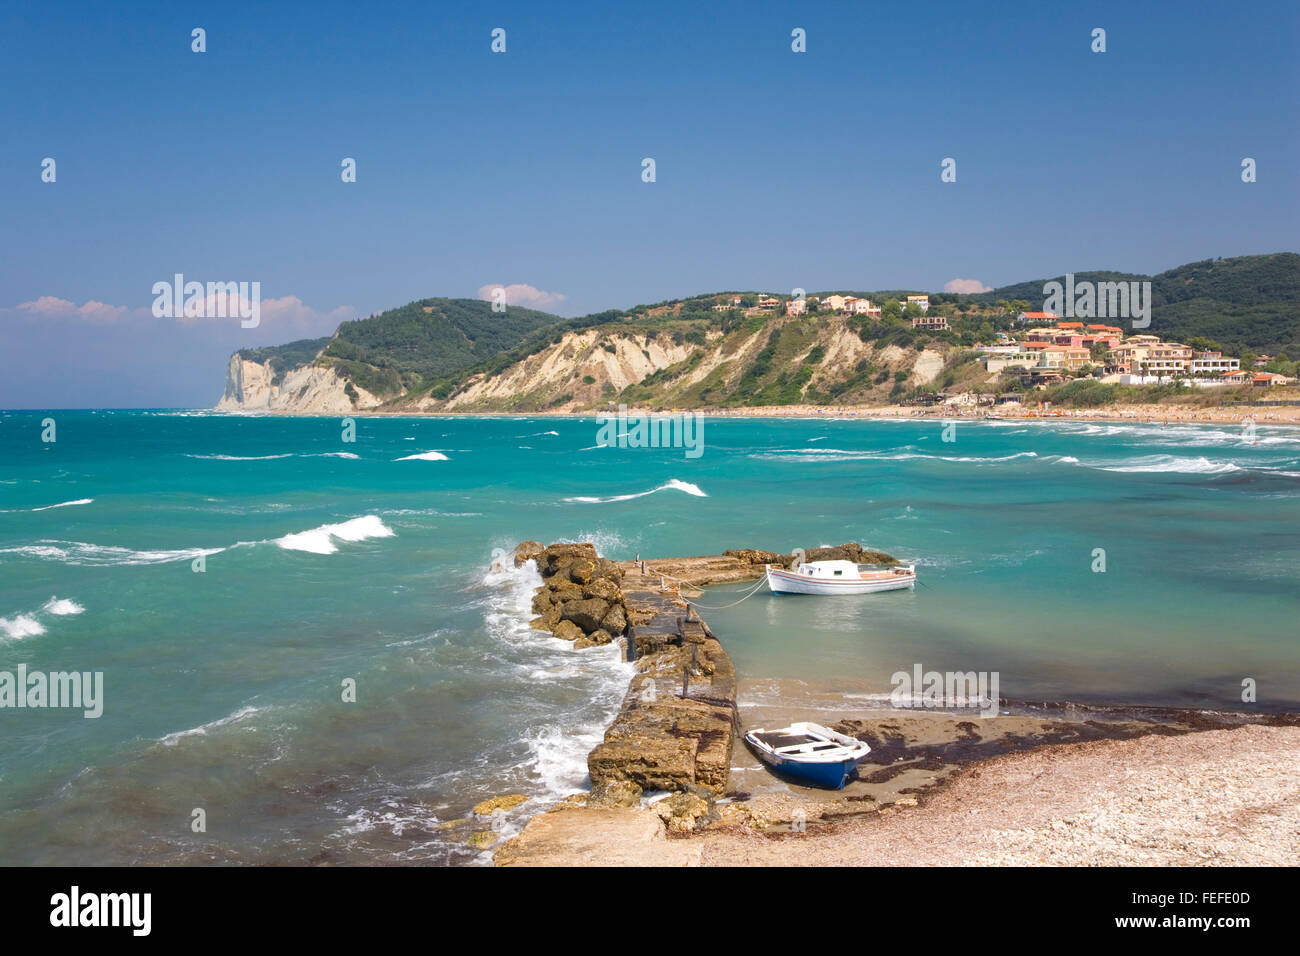 Agios Stefanos (west), Corfu, Ionian Islands, Greece. View across rough turquoise sea, waves crashing against breakwater. Stock Photo